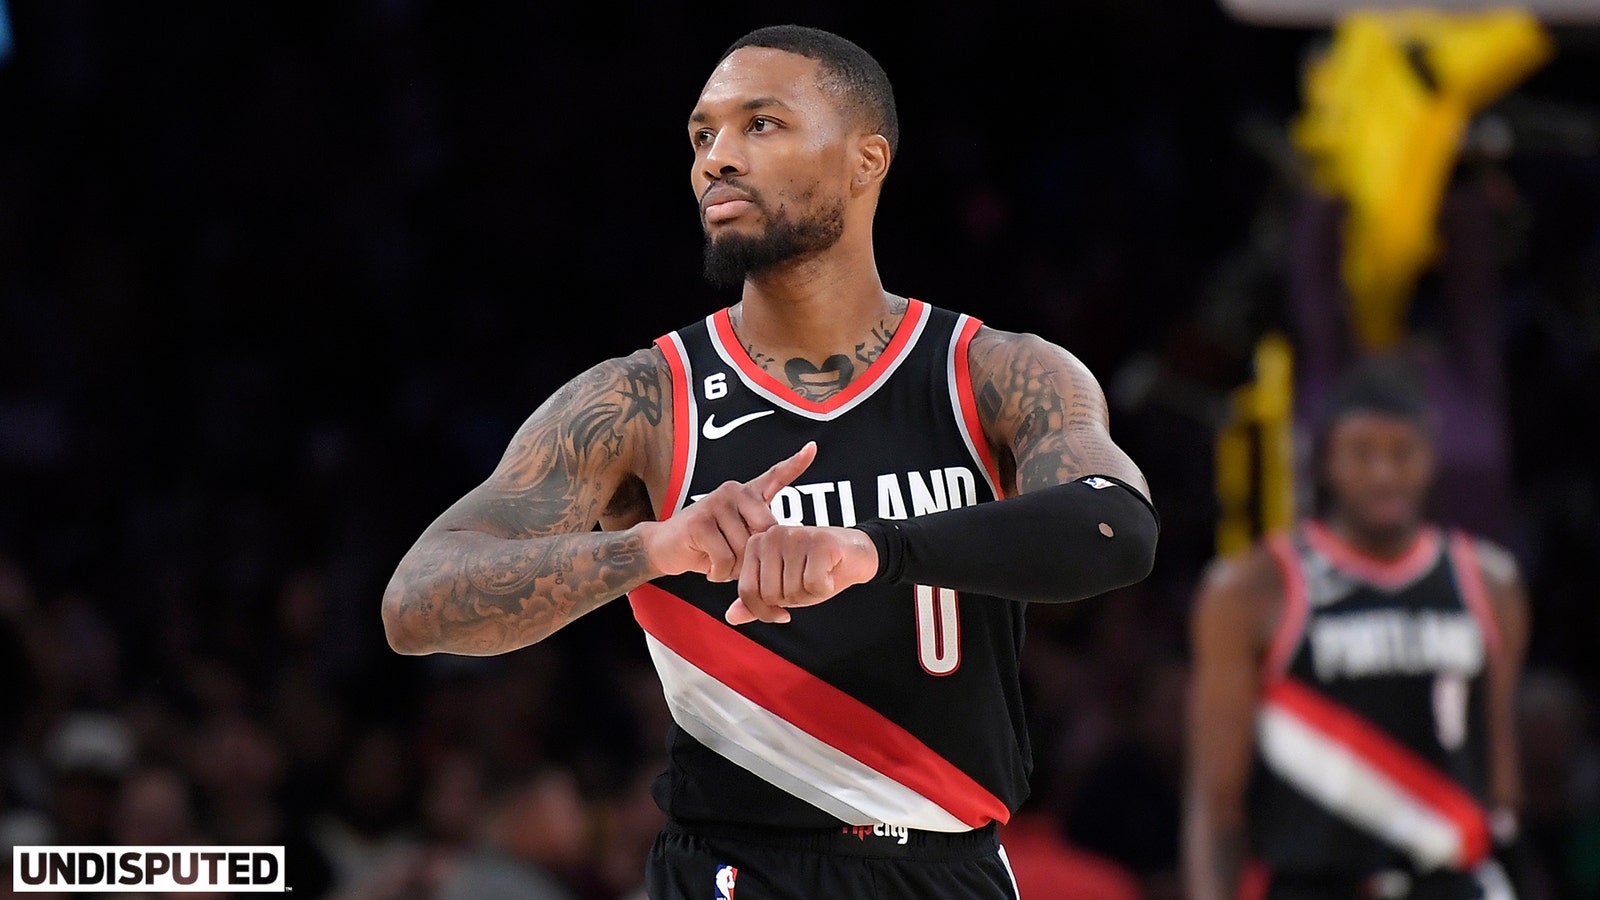 Damian Lillard traded to Bucks in 3-team deal, teams with Giannis & Middleton